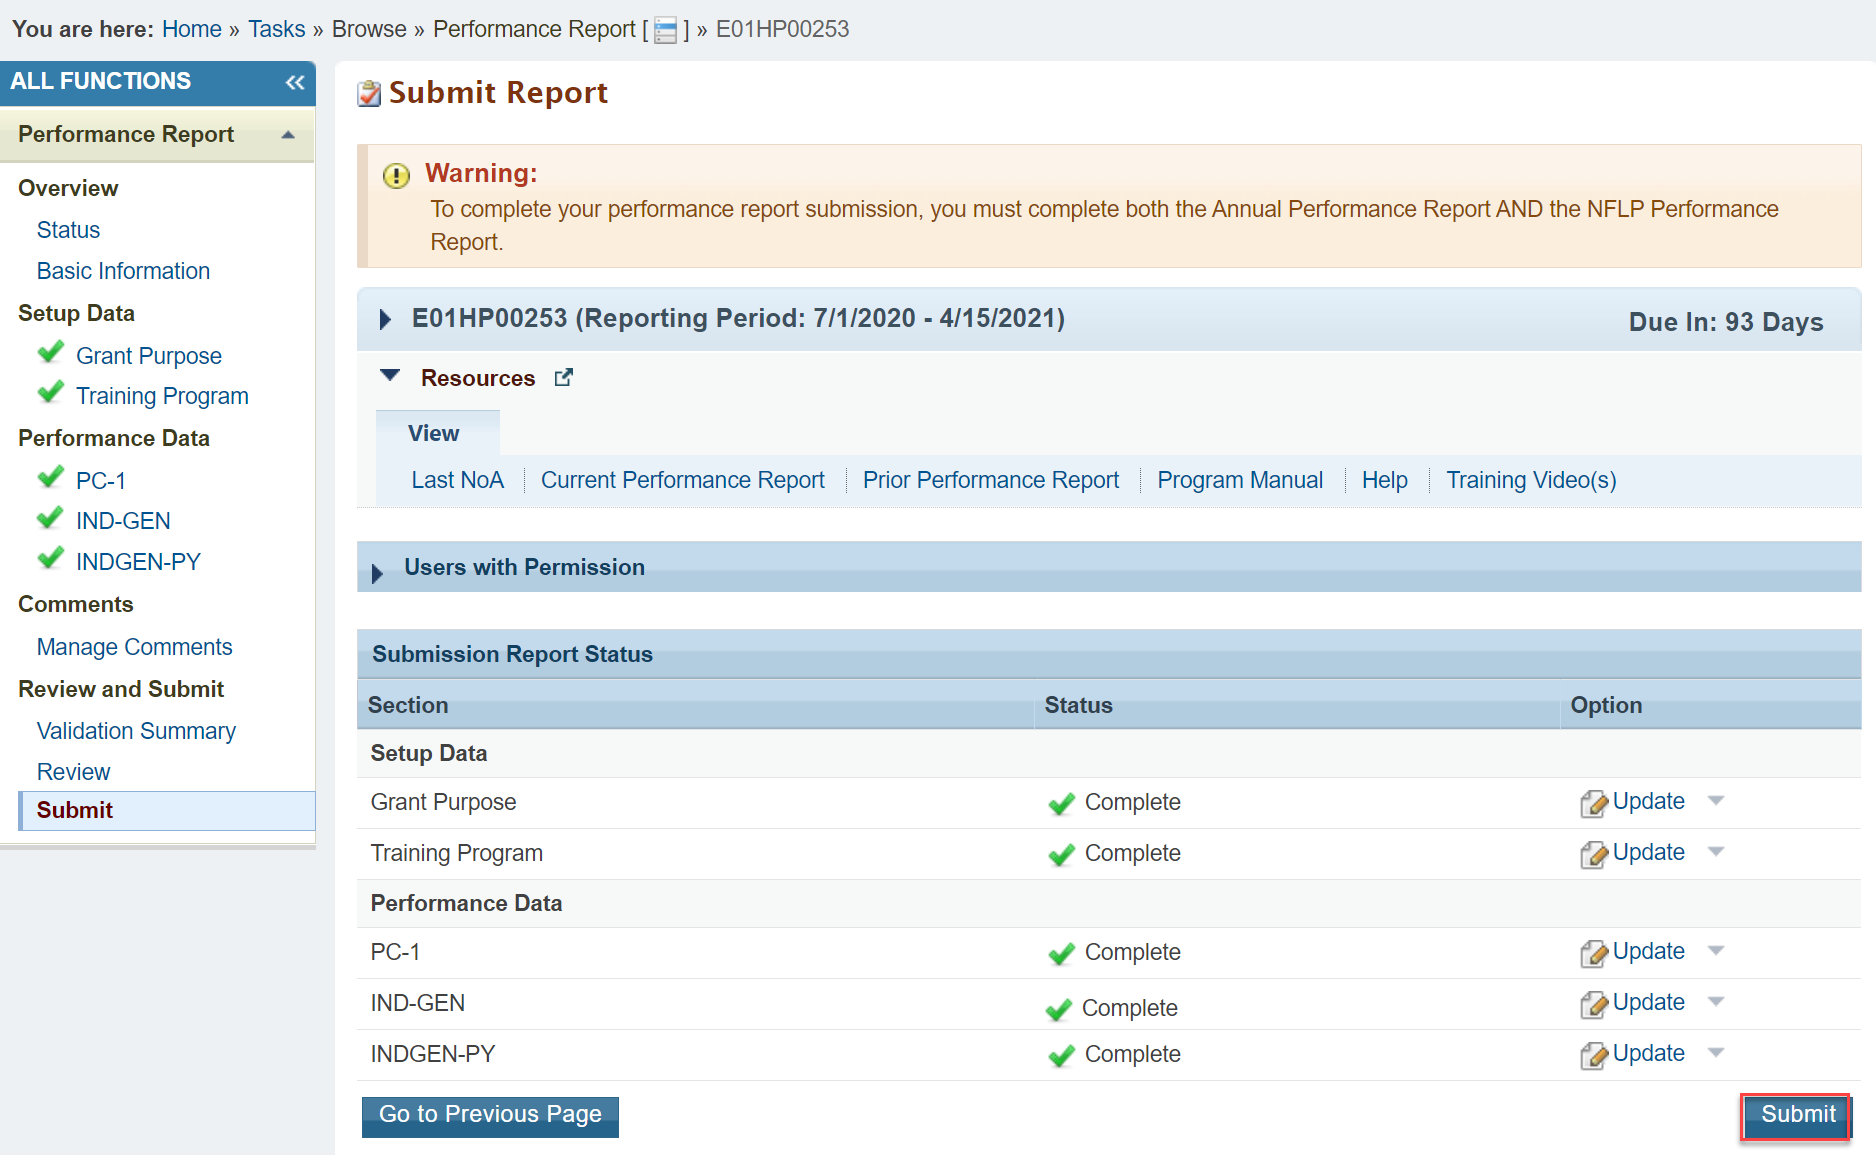 Screenshot of the Submit Report Page showing the Submit button